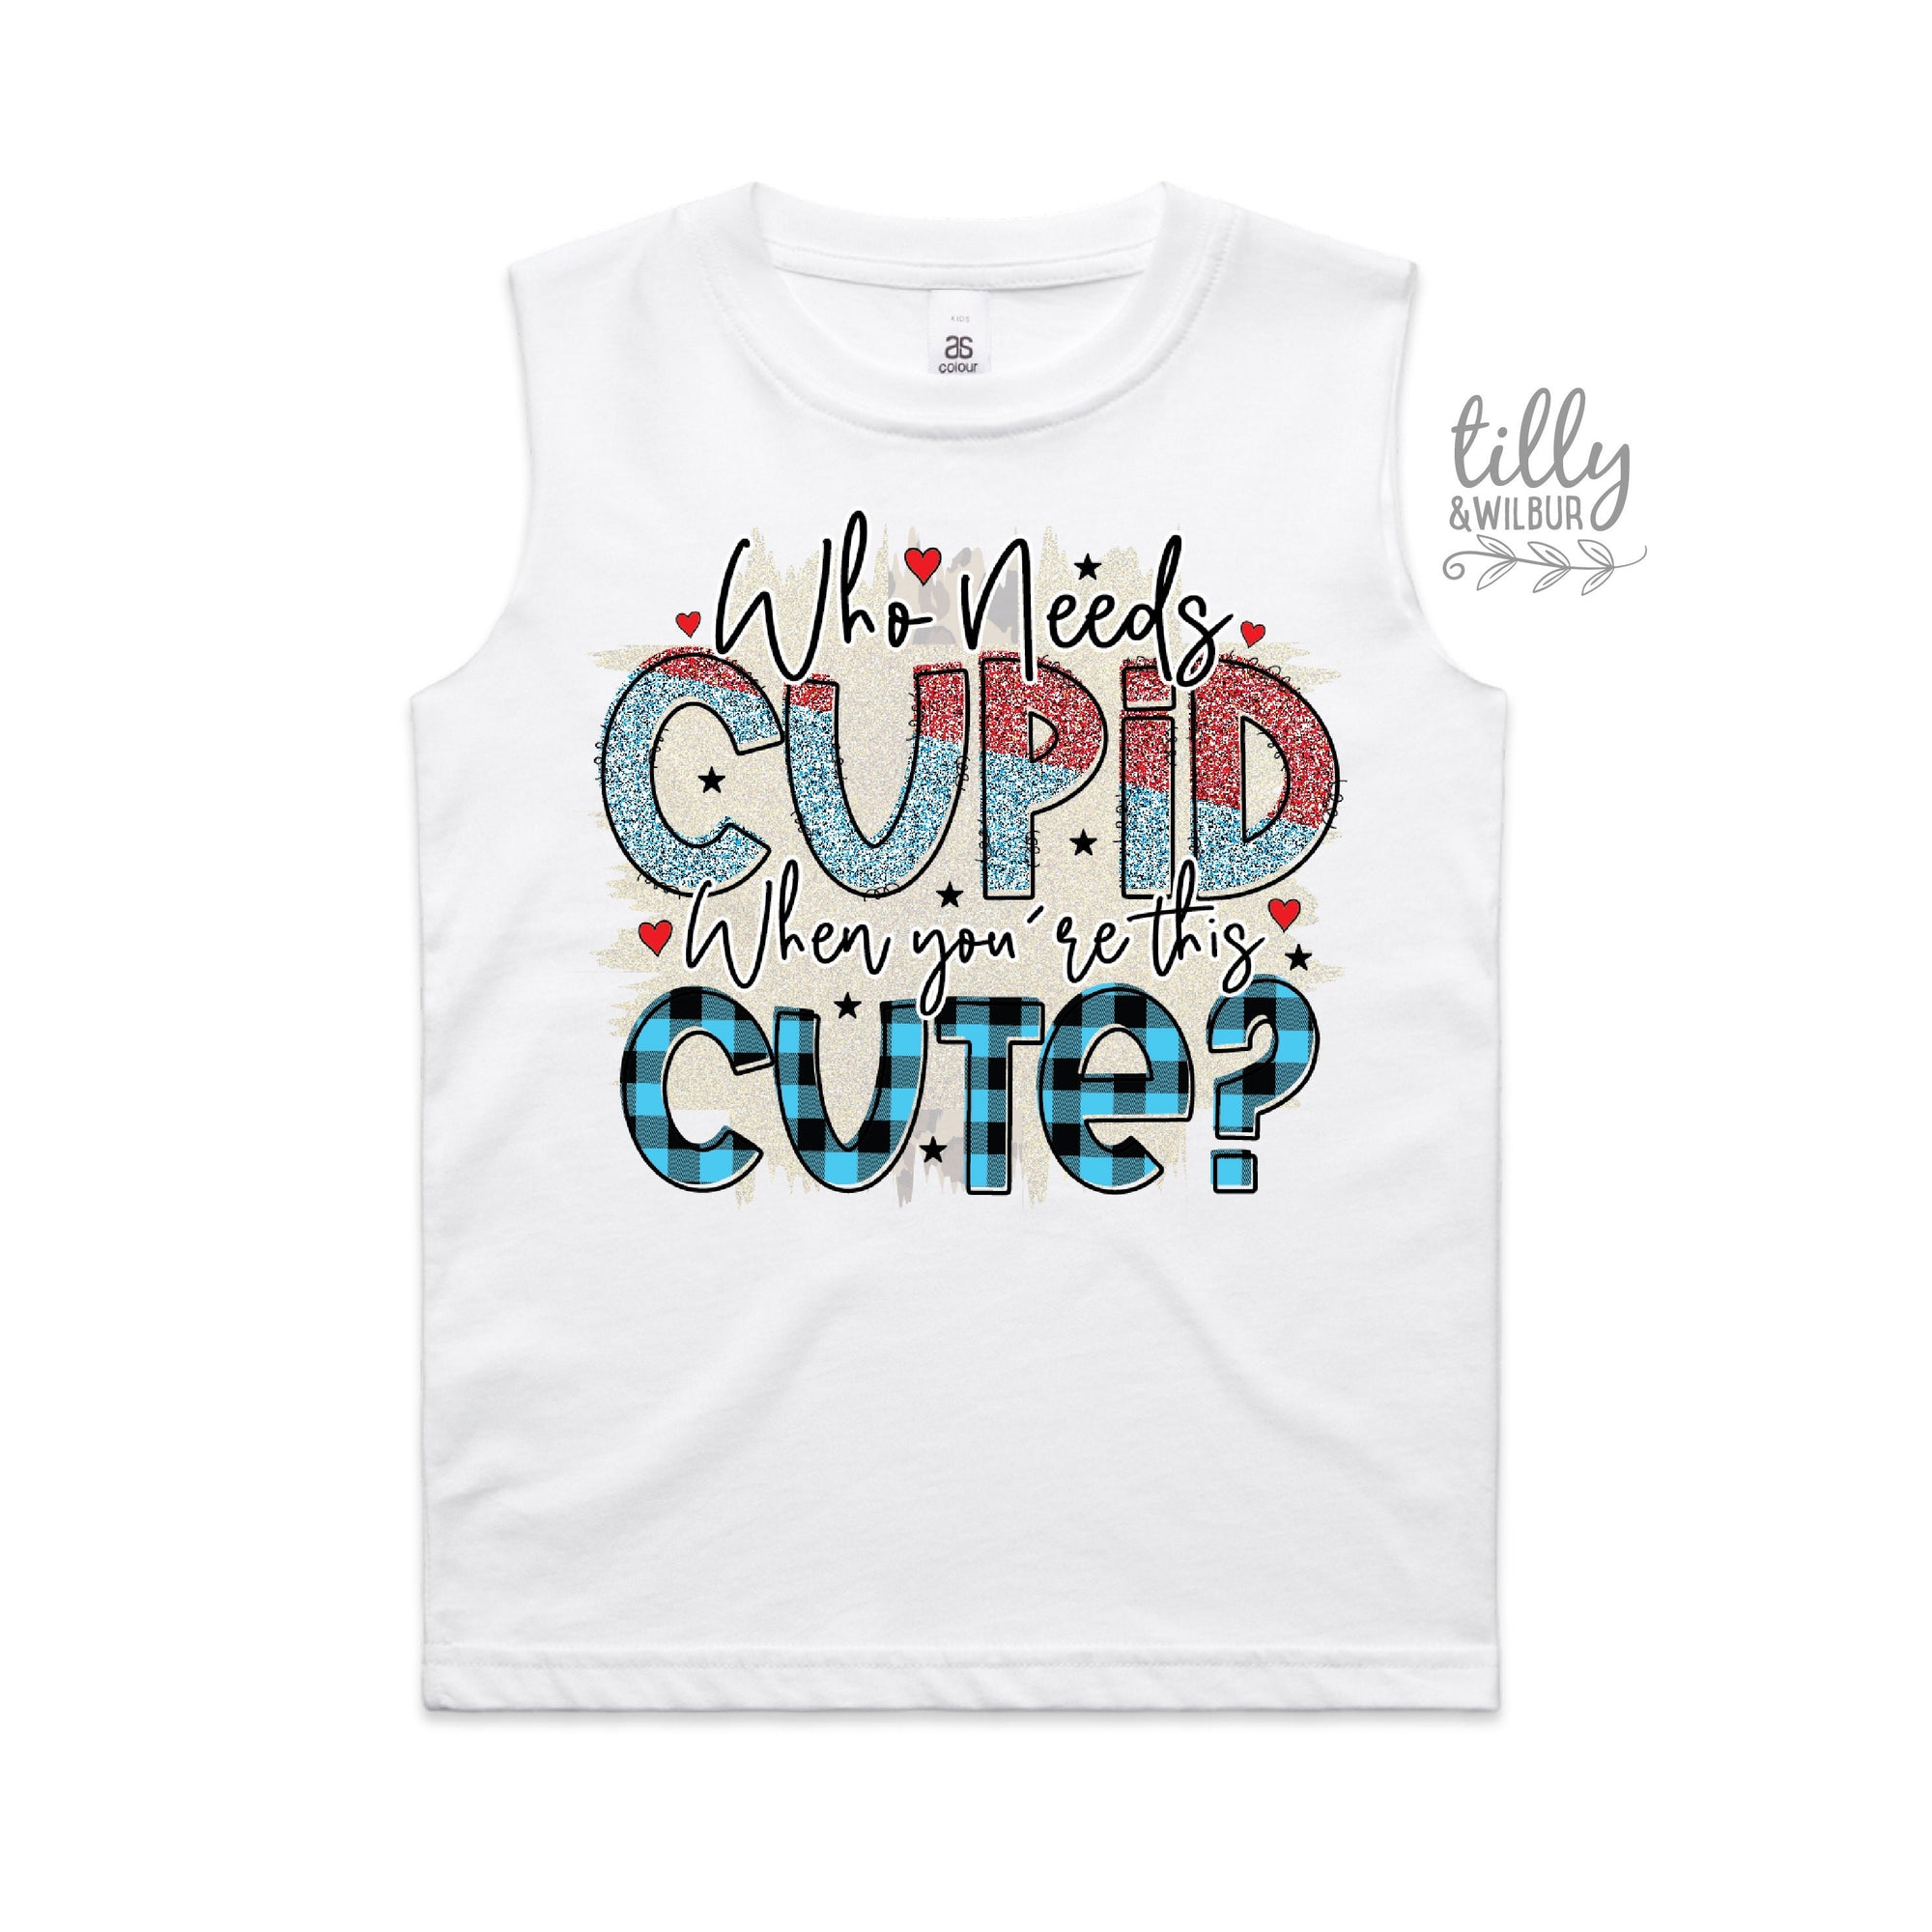 Who Needs Cupid When You're This Cute Singlet, Valentine's Day Tank, Valentines Day T-Shirt, Funny Valentine's Day Gift, Ladies Man T-Shirt